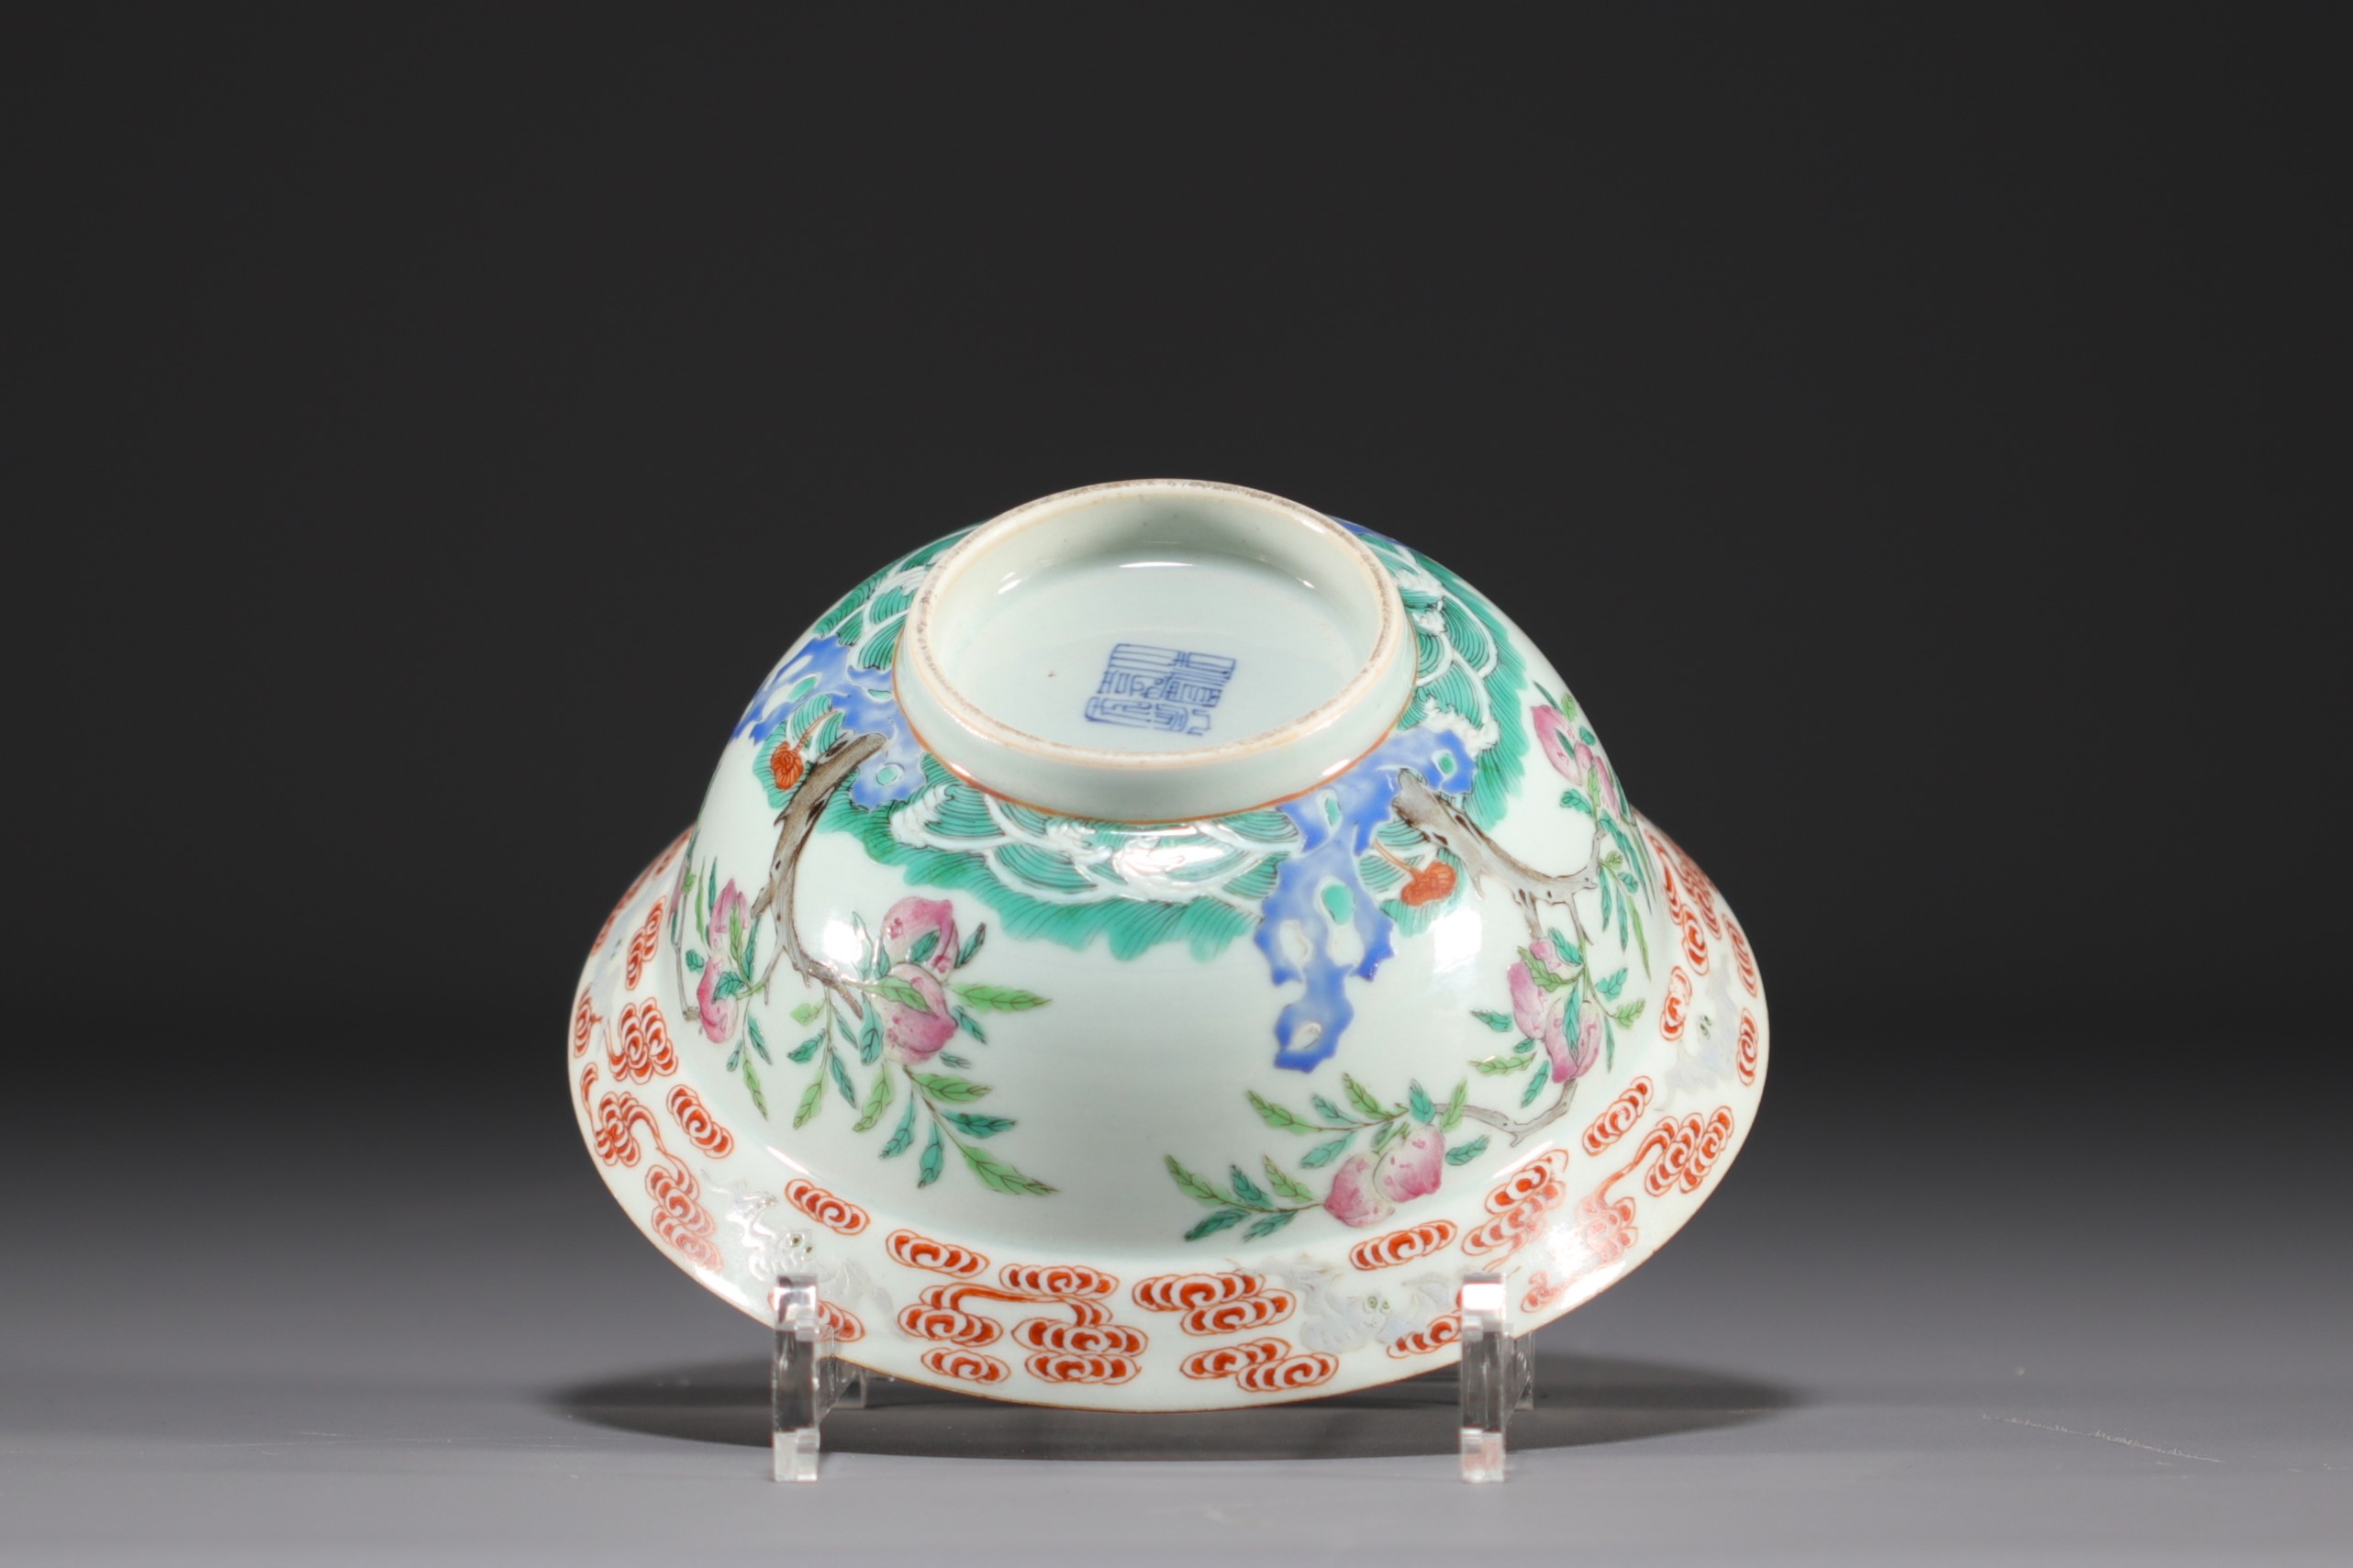 China - Porcelain bowl decorated with peaches and bats, Jiaqing period, late 18th / early 19th centu - Image 2 of 4